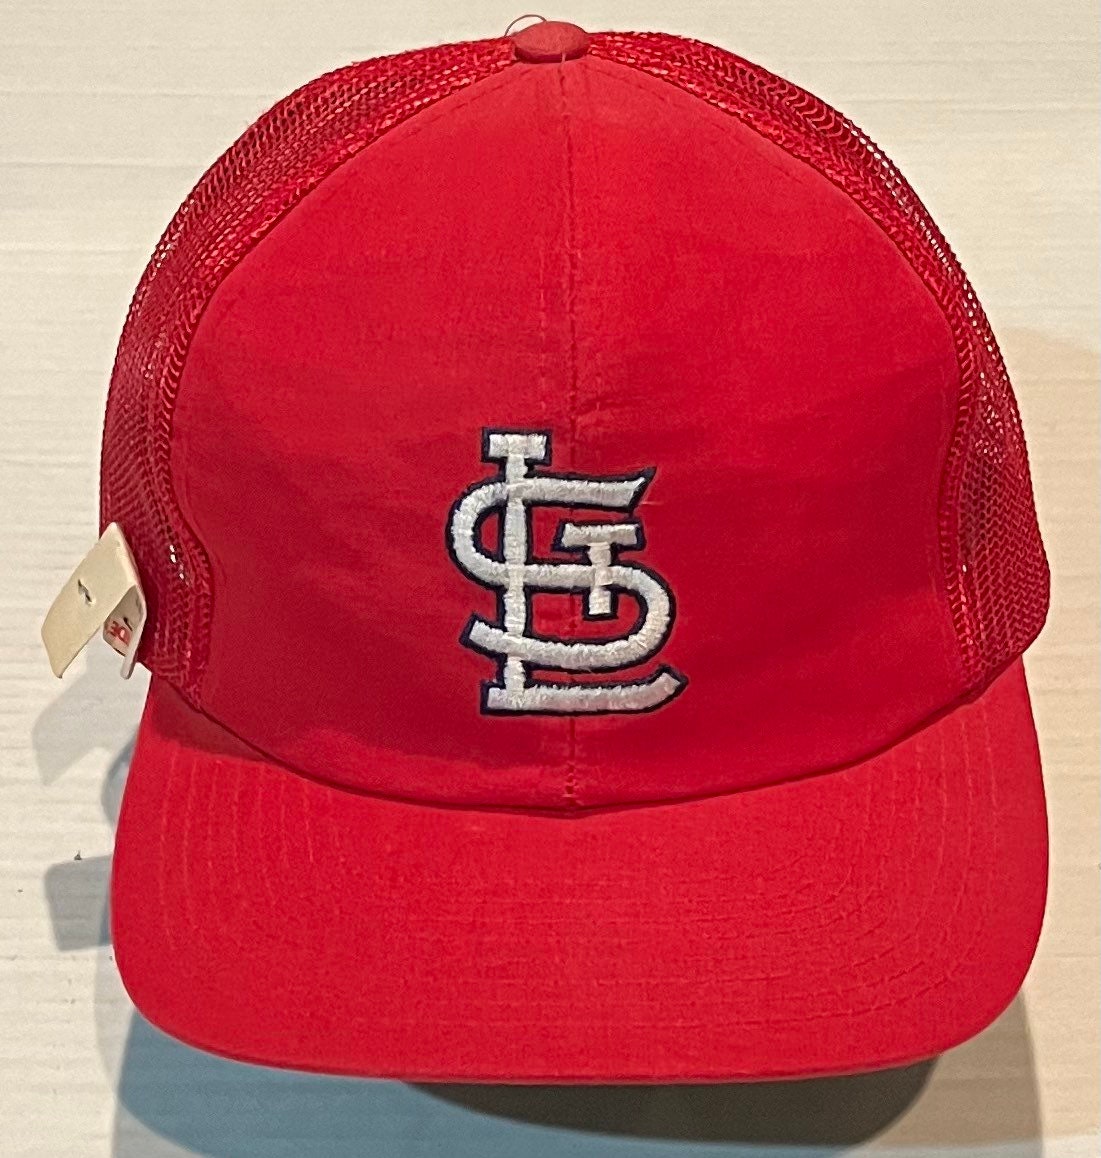 MLB St Louis Cardinals 3D Logo Red Blue Adjustable Curved Bill Hat Cap Retro Nwt